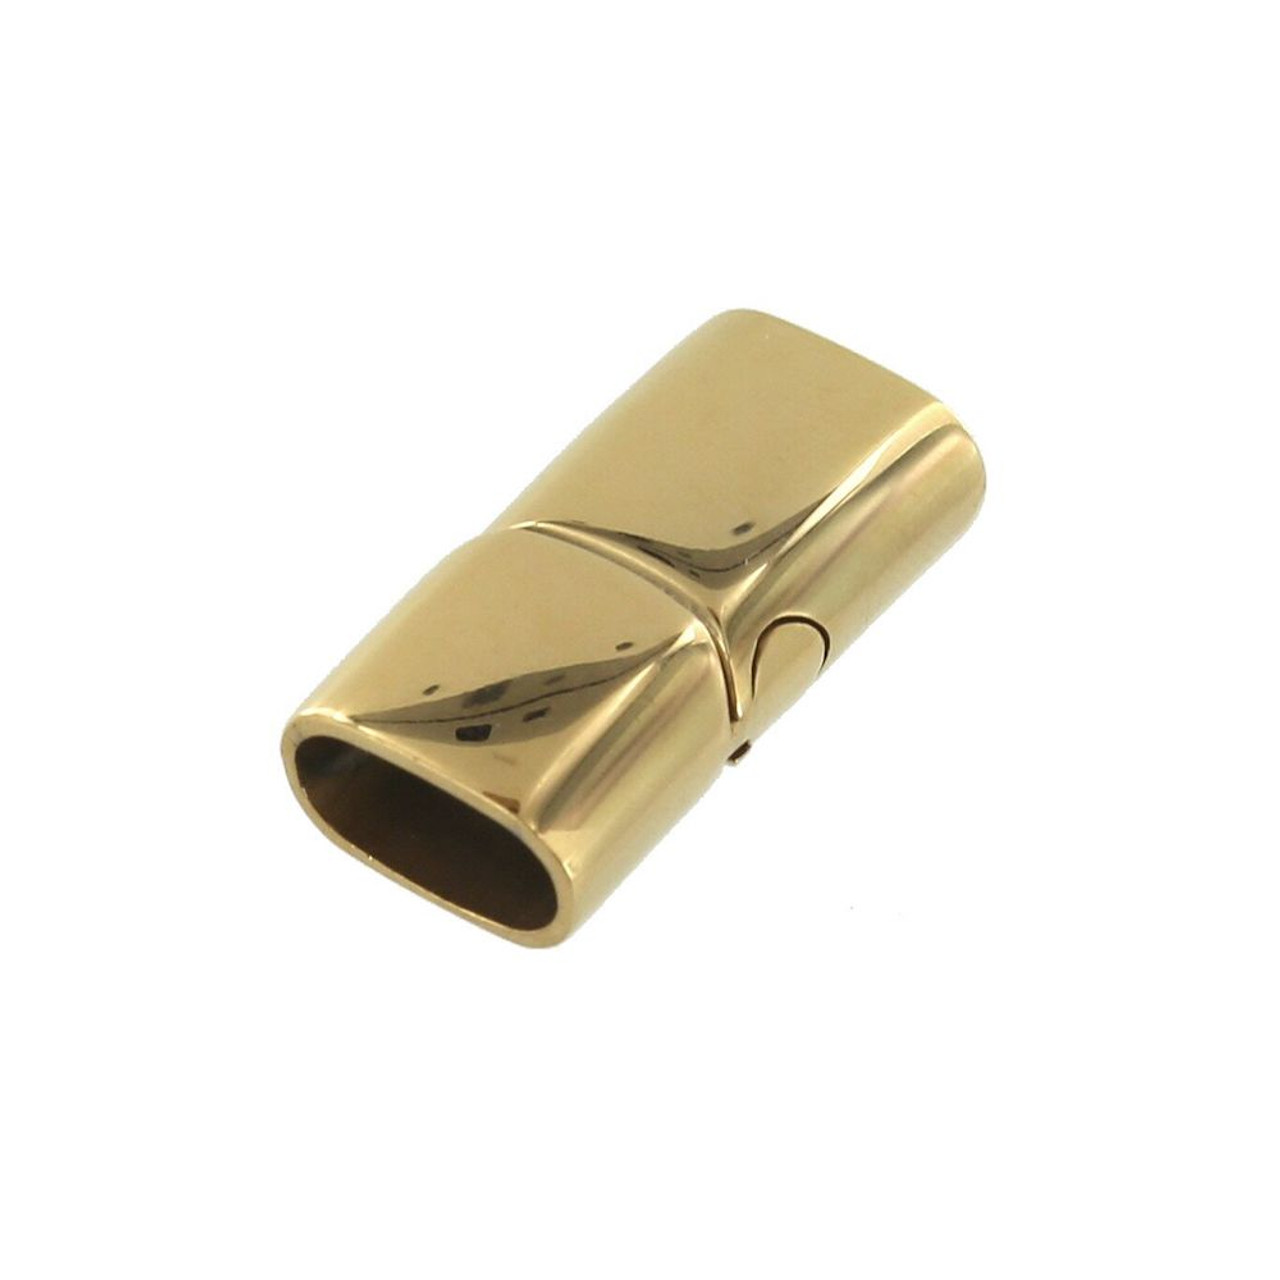 B9001 Hole 12.2 x 6.5mm, Magnetic Bracelet Clasp, PVD Gold, Stainless Steel  